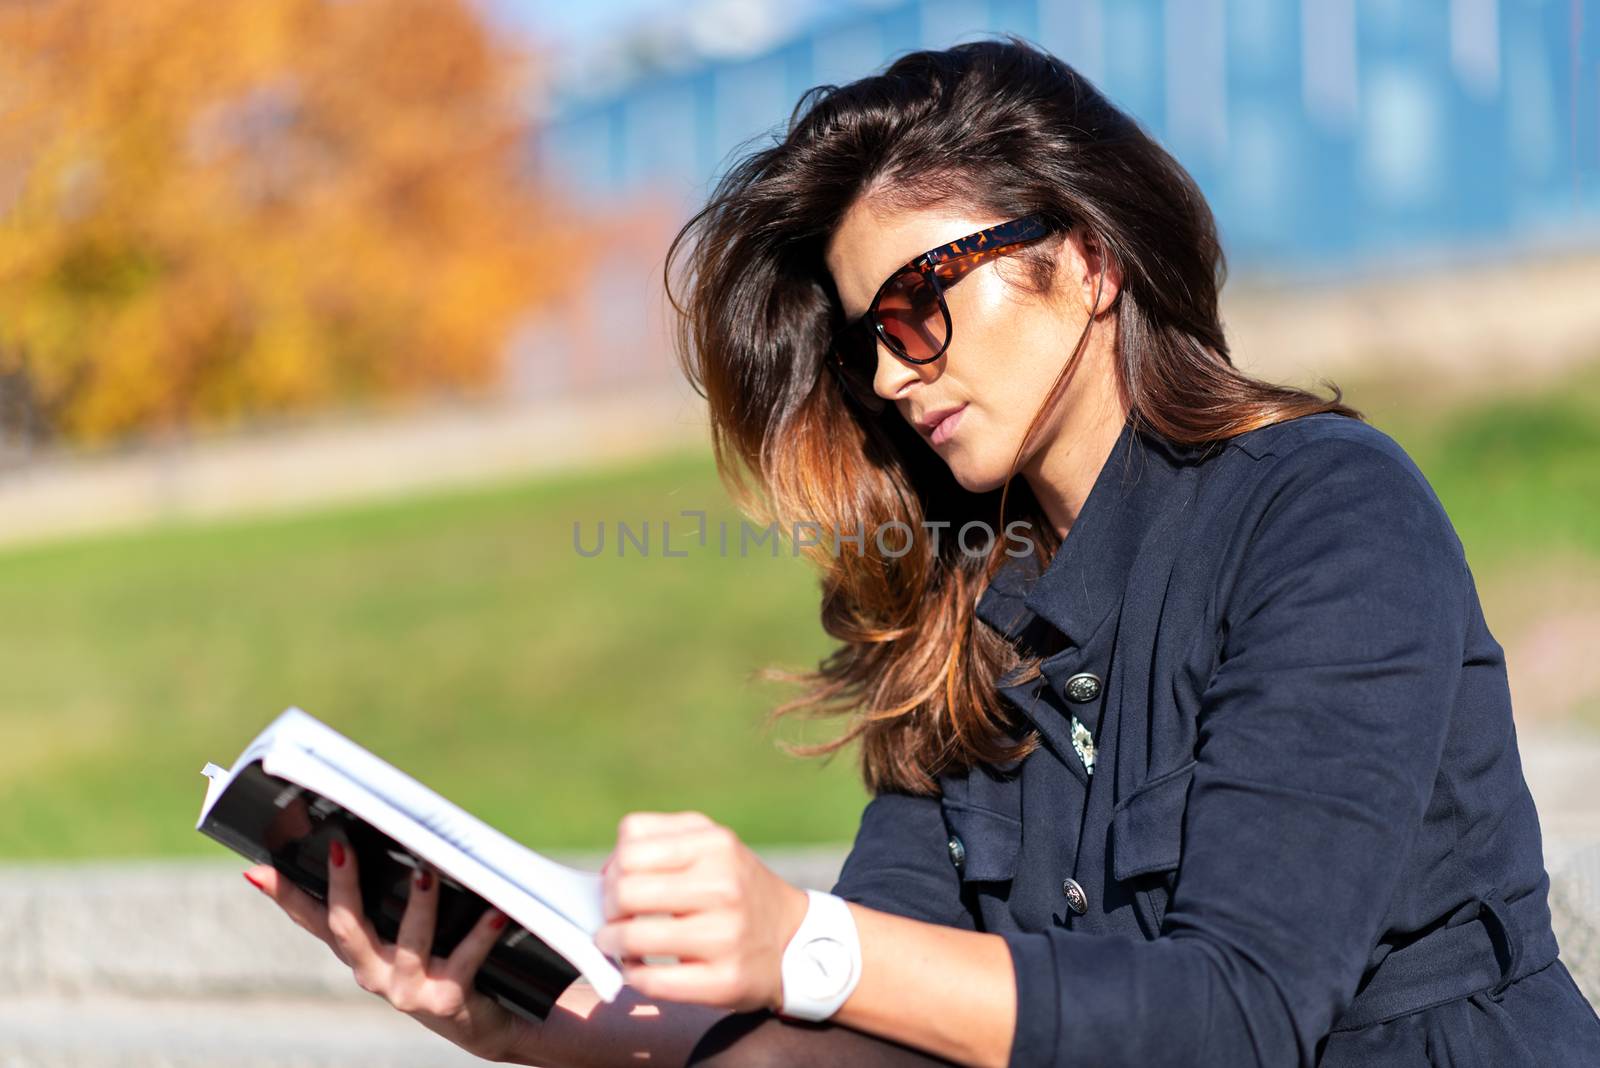 Woman reading a book by wdnet_studio